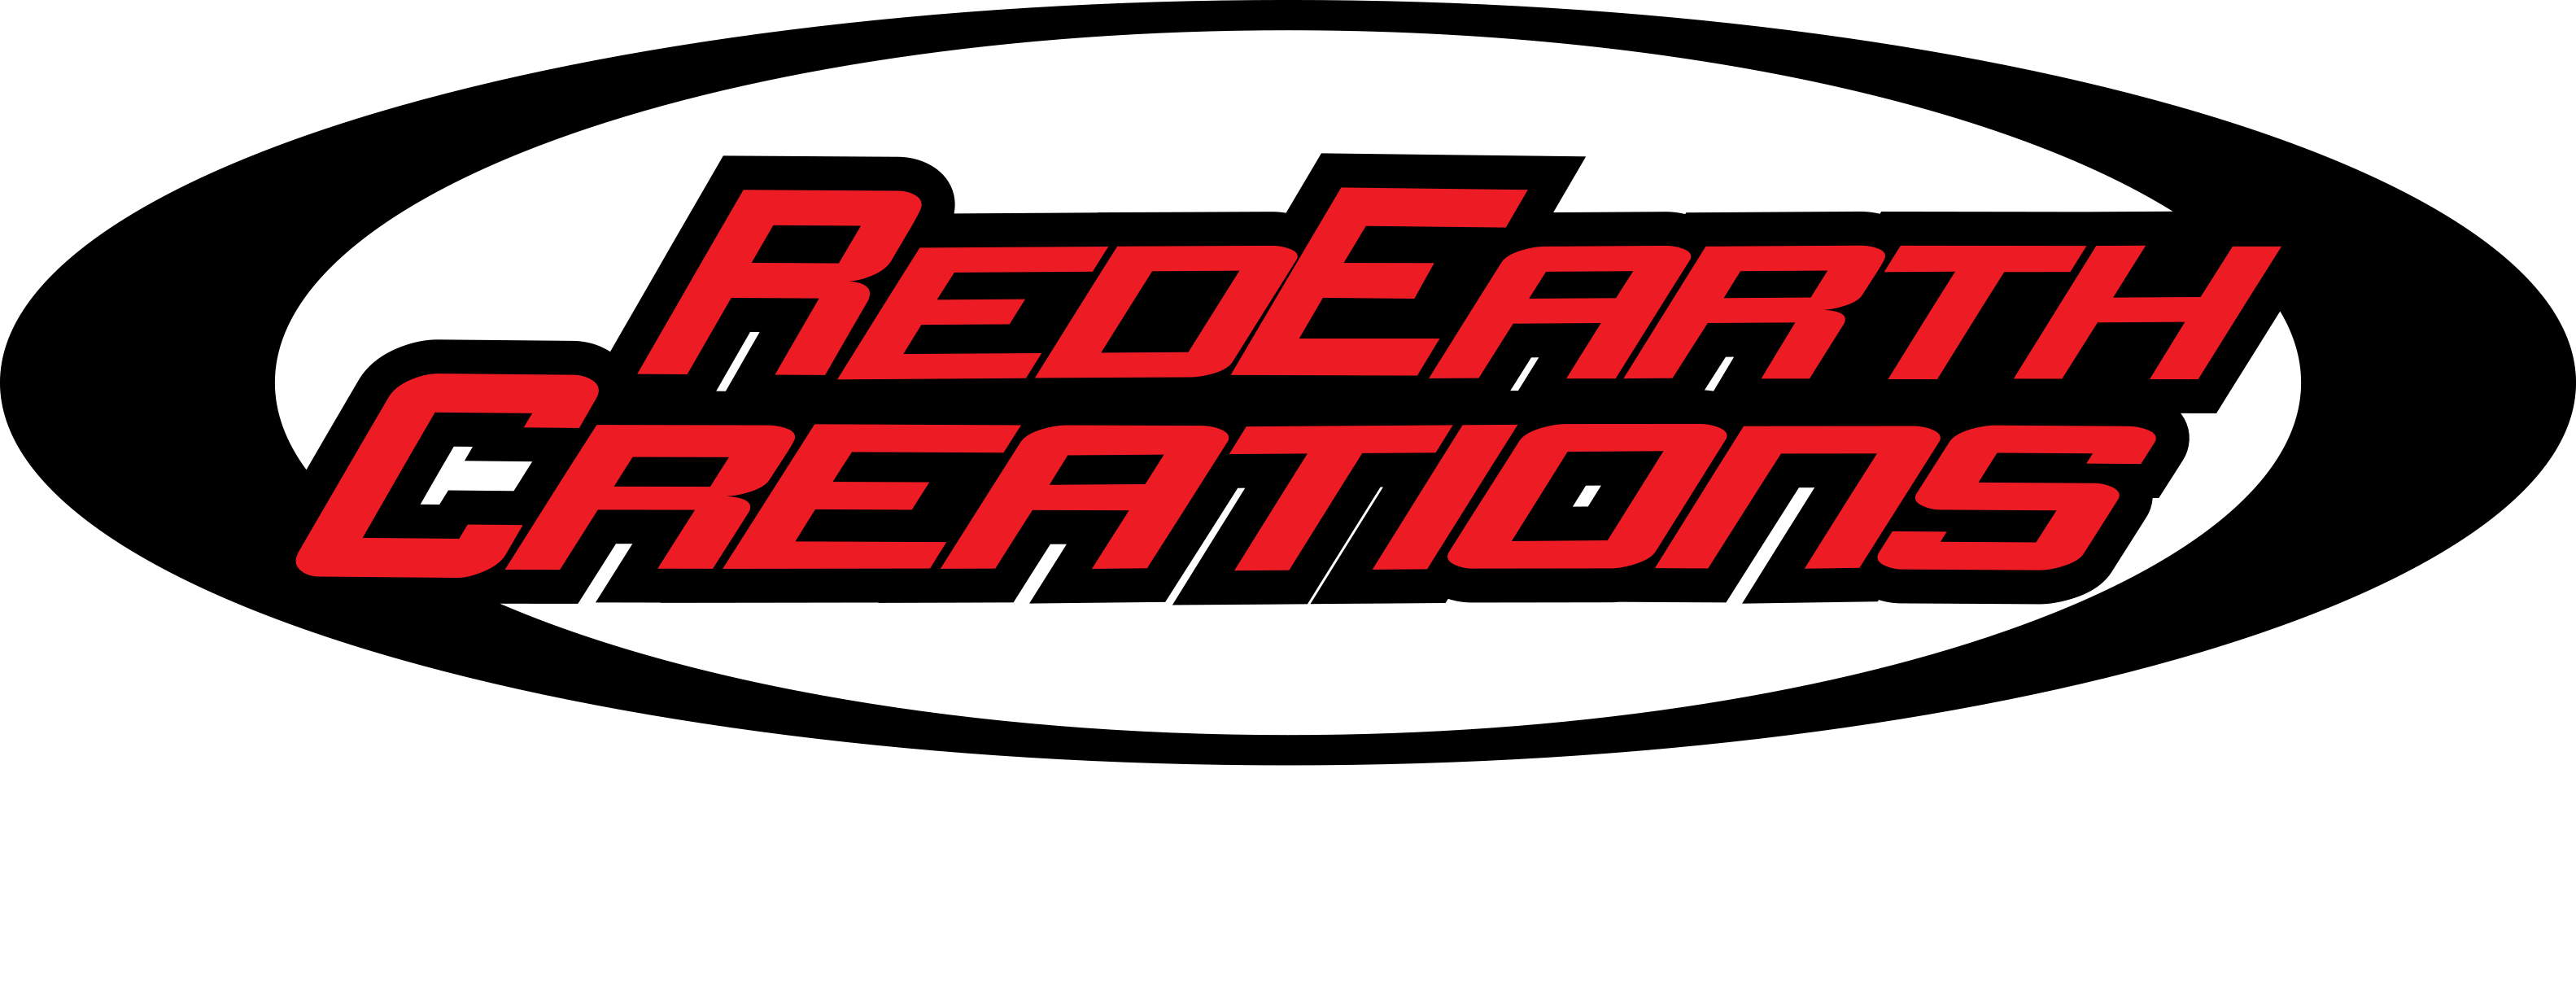 Red Earth Creations